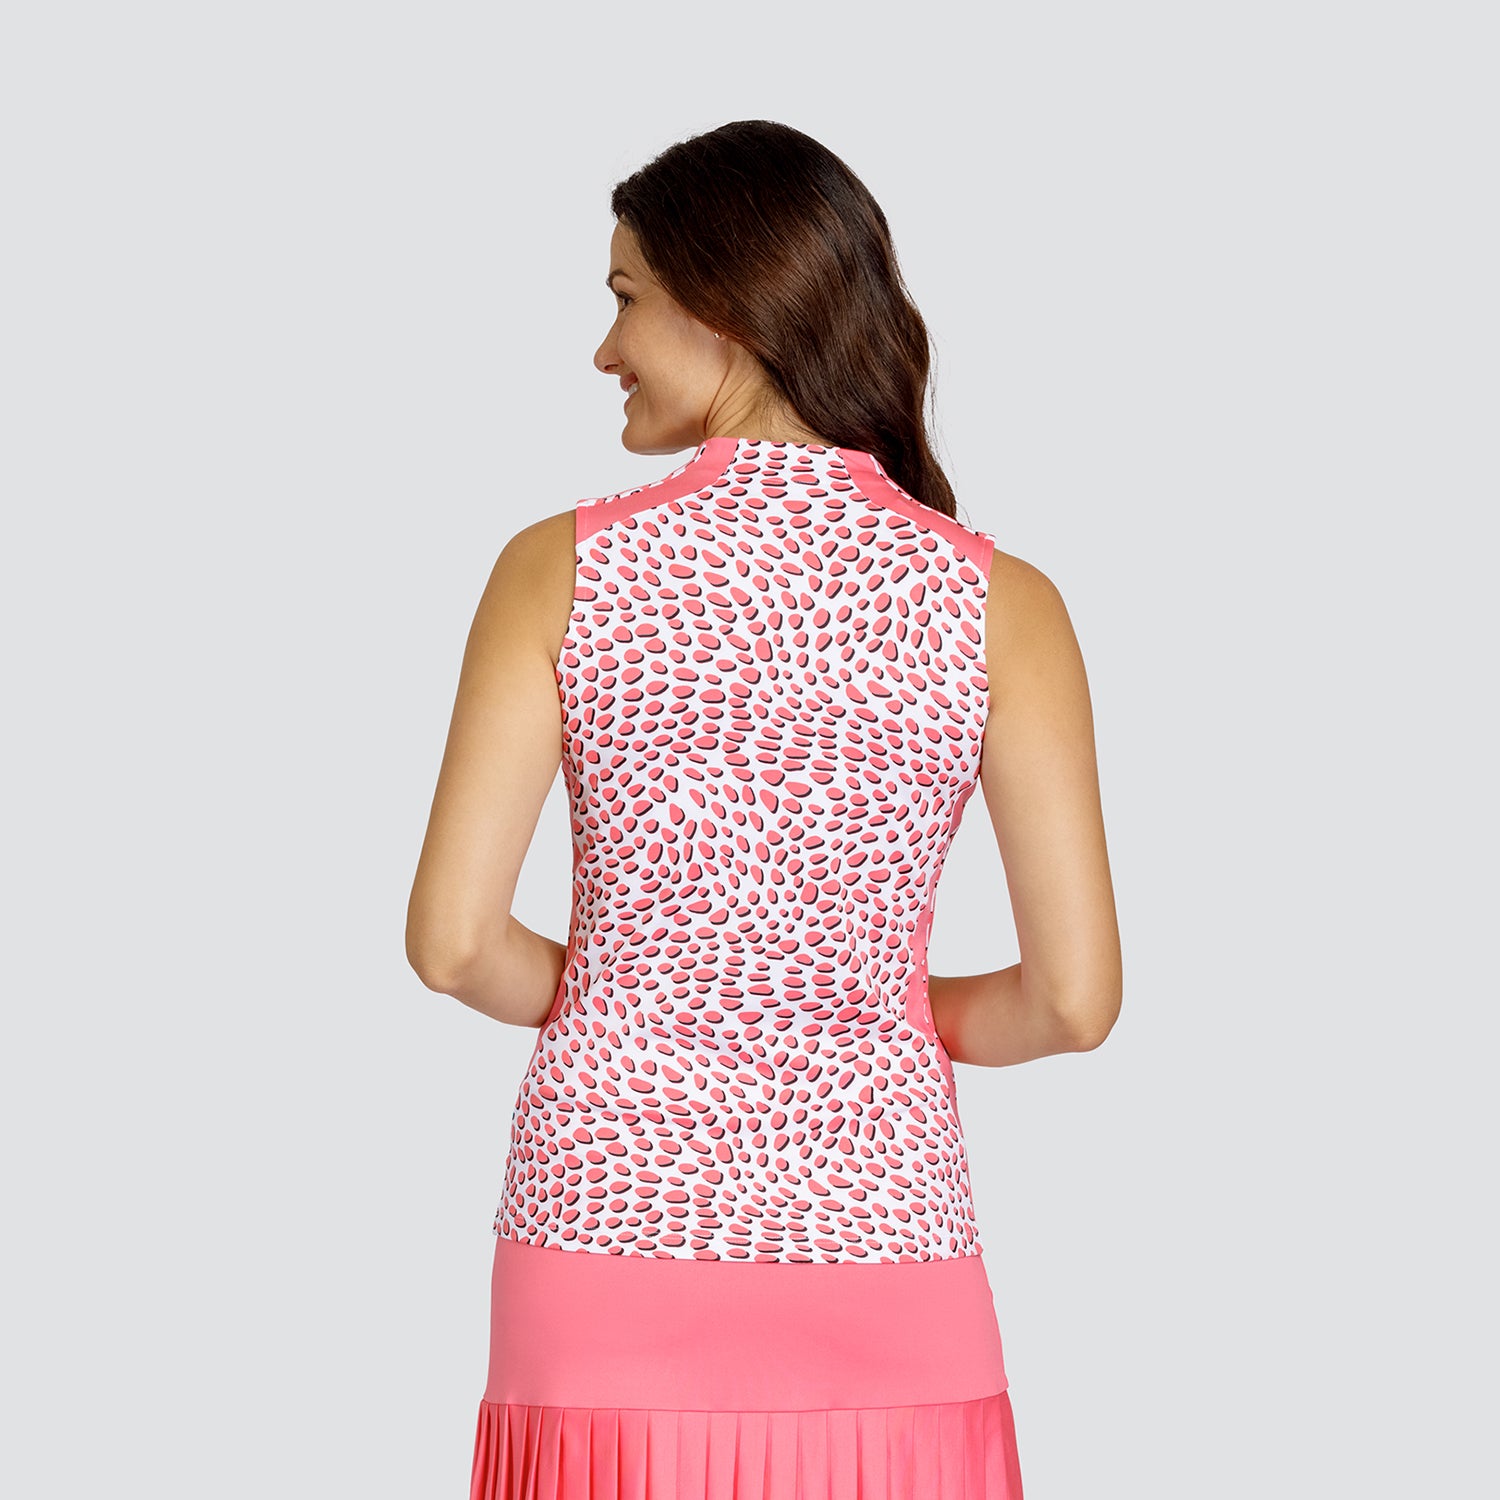 Tail Ladies Speckled Print Sleeveless Funnel Neck Golf Top - Last One Medium Only Left